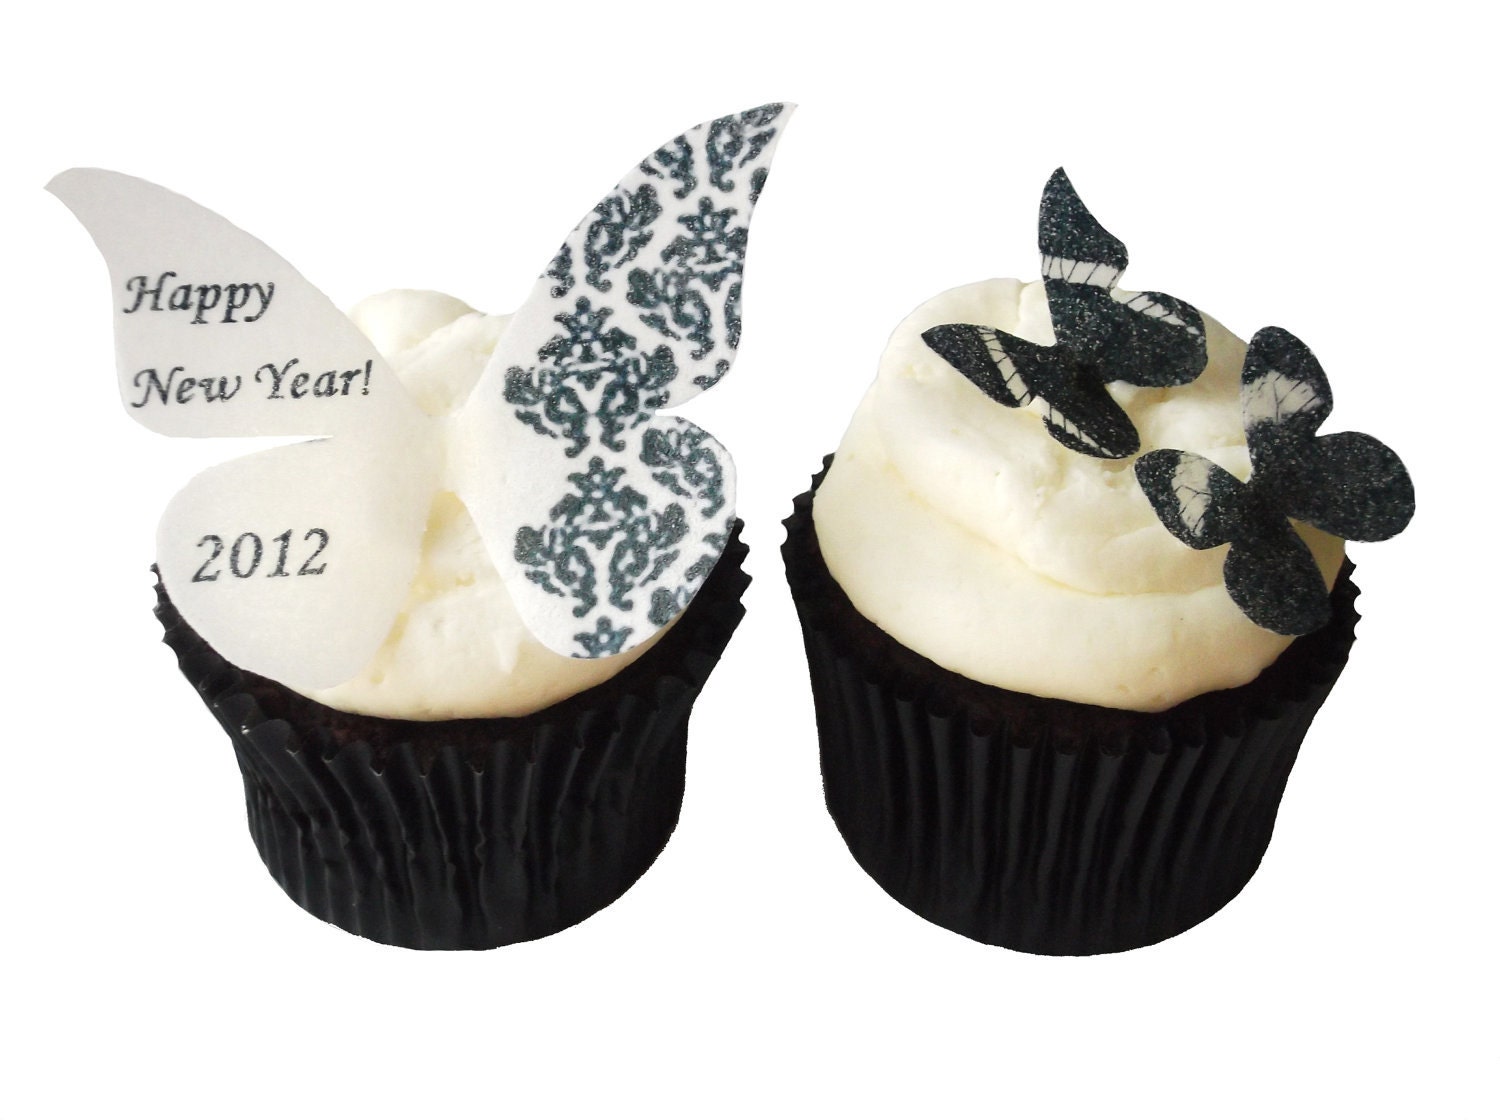 36 Edible Butterflies Damask Cupcakes NEW YEARS EVE 2012 Black and White 